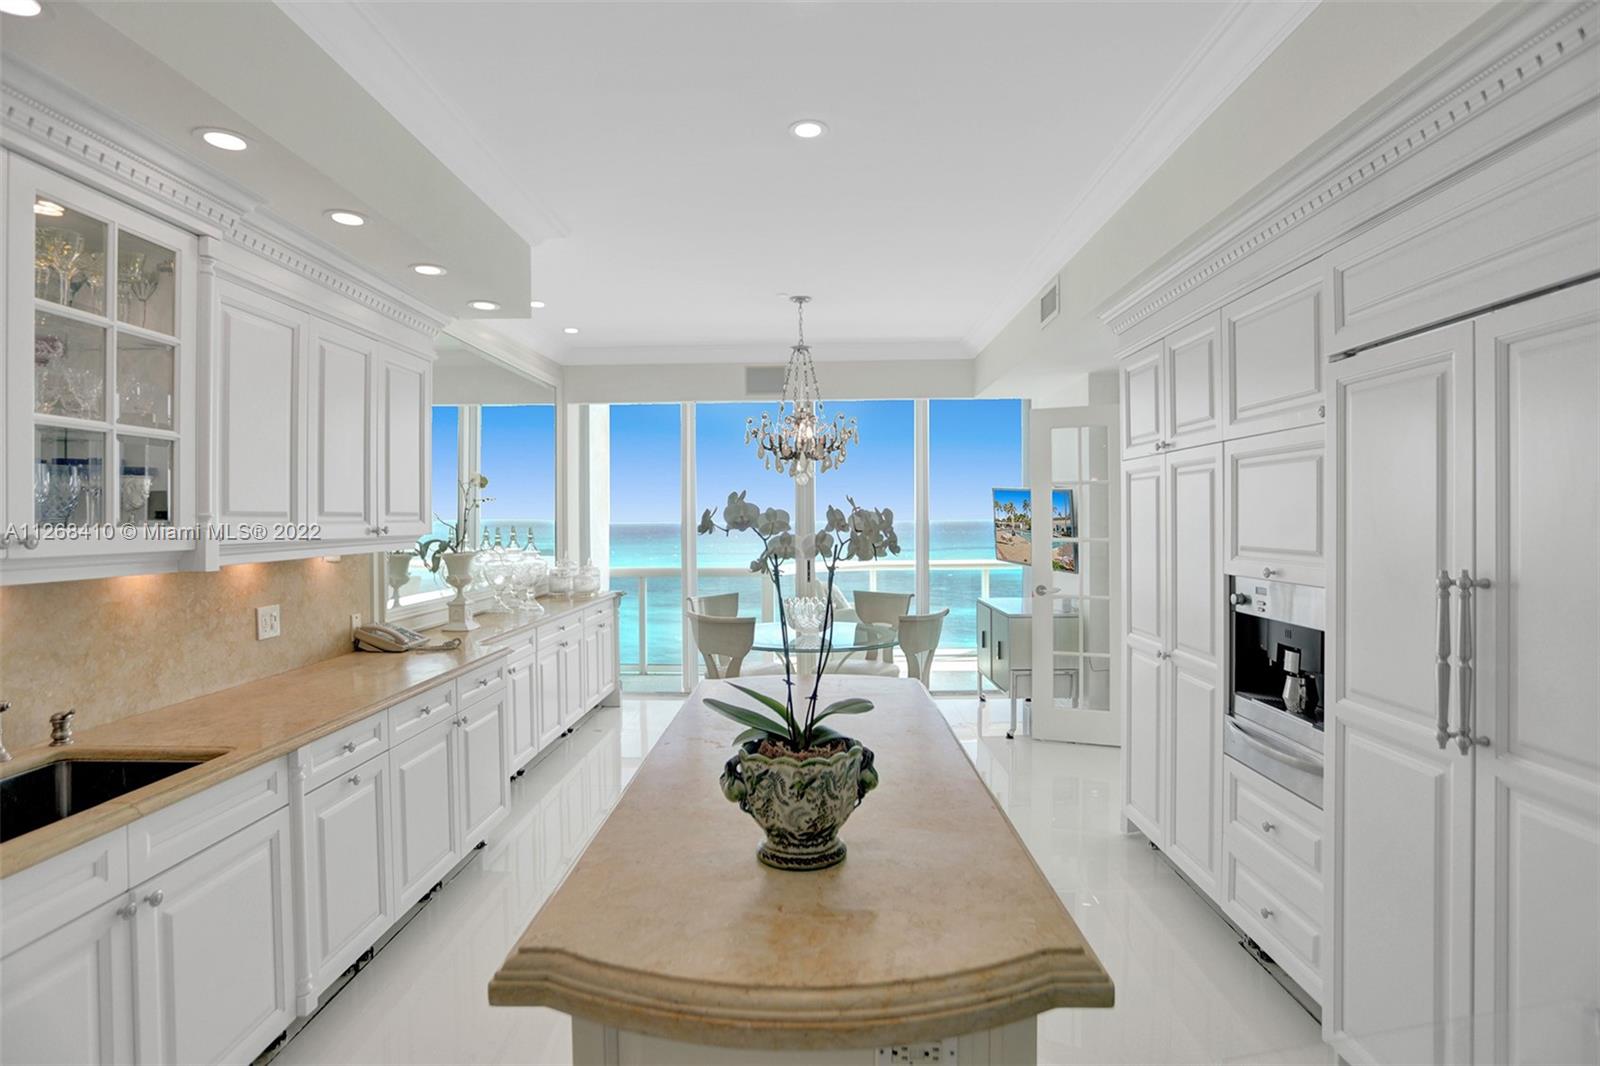 Incredible opportunity to own one of the best penthouses in Bal Harbour. Located in the exclusive Bal Harbour Palace, this SE corner unit has some of the most dramatic direct ocean and intra coastal views around. Enter from your private elevator and foyer into this distinctive 3 bedroom, 3.5 bathroom with 3,690 sqft of impeccably finished with custom built-ins, crown moldings, designer kitchen and an enormous terrace that wraps around the entire unit. COMPLETELY RENOVATED. The Bal Harbour Palace features every amenity from valet parking, swimming pool, tennis courts, spa, beach service, full service restaurant and so much more.